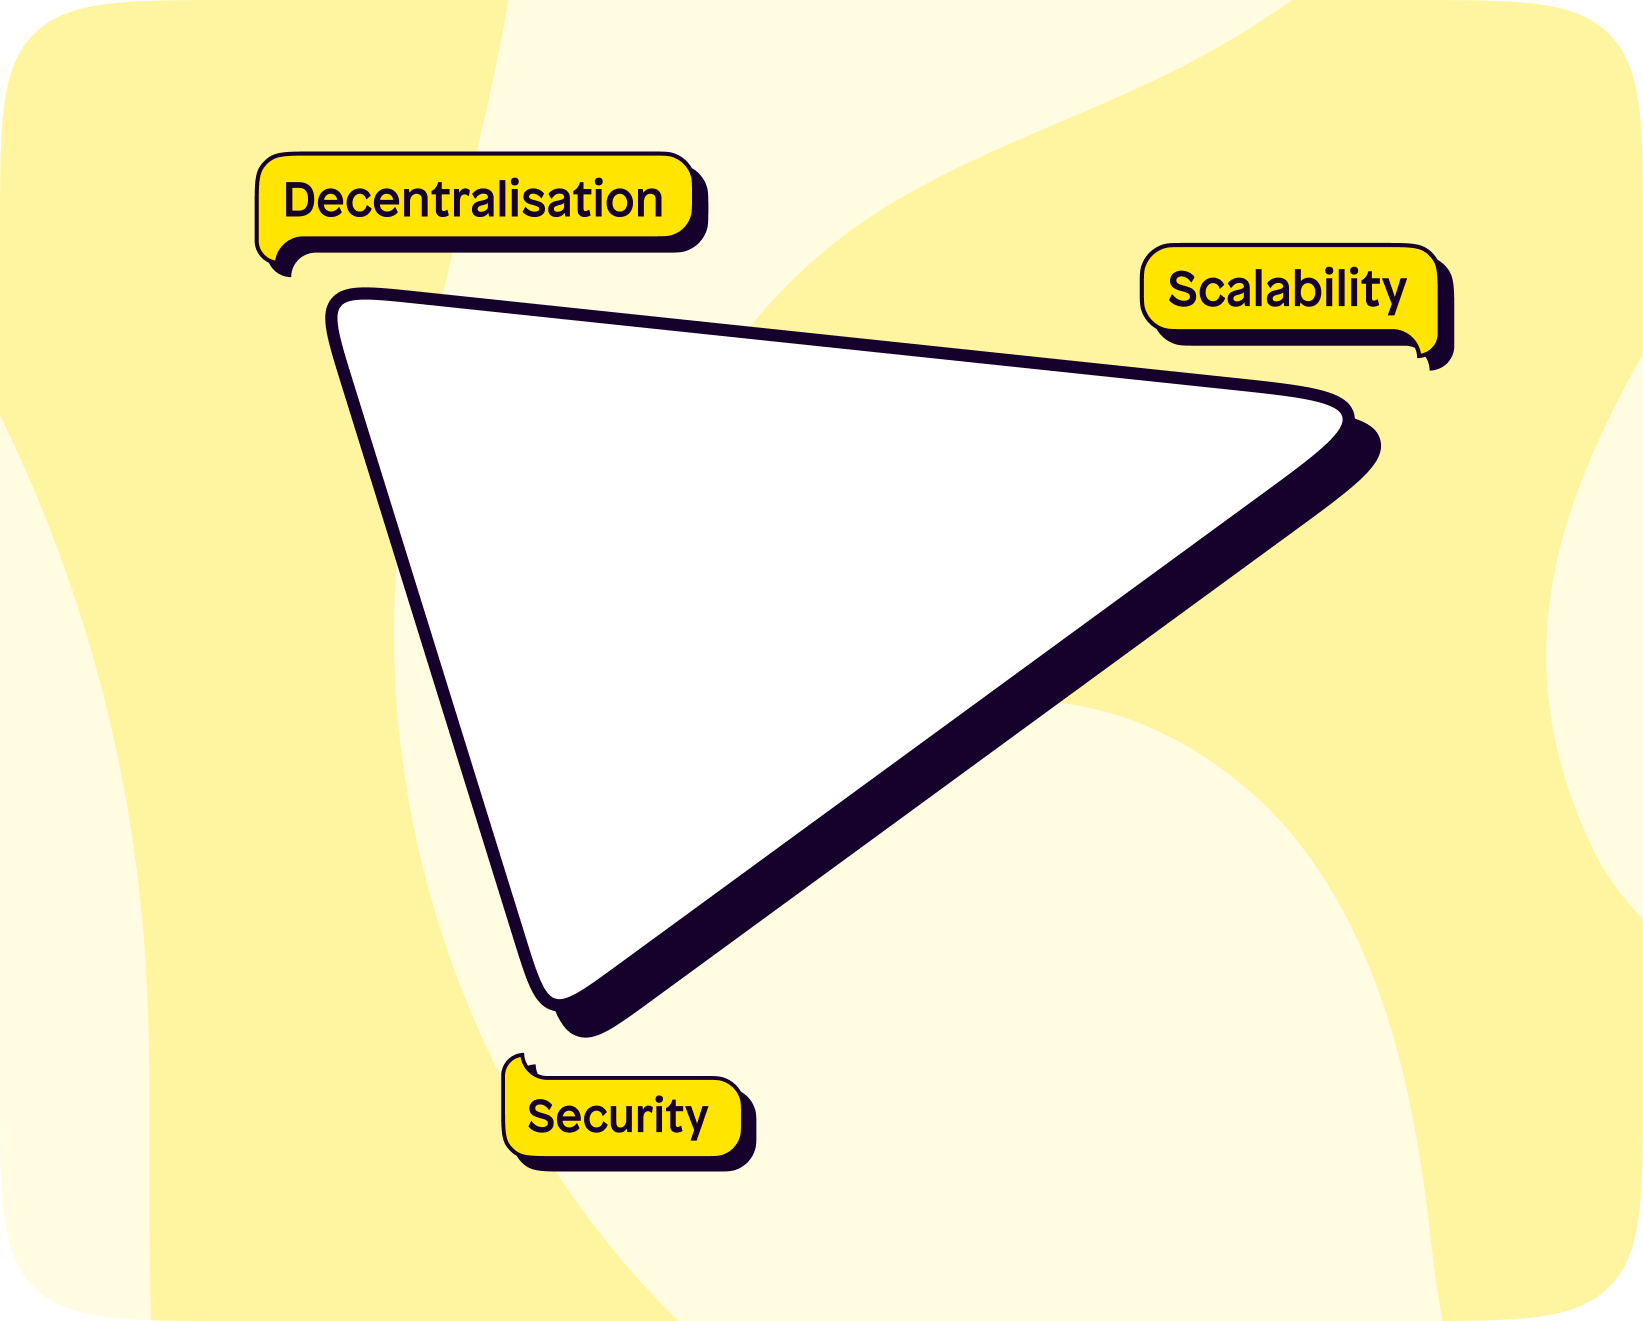 The blockchain trilemma between decentralisation, scalability and security